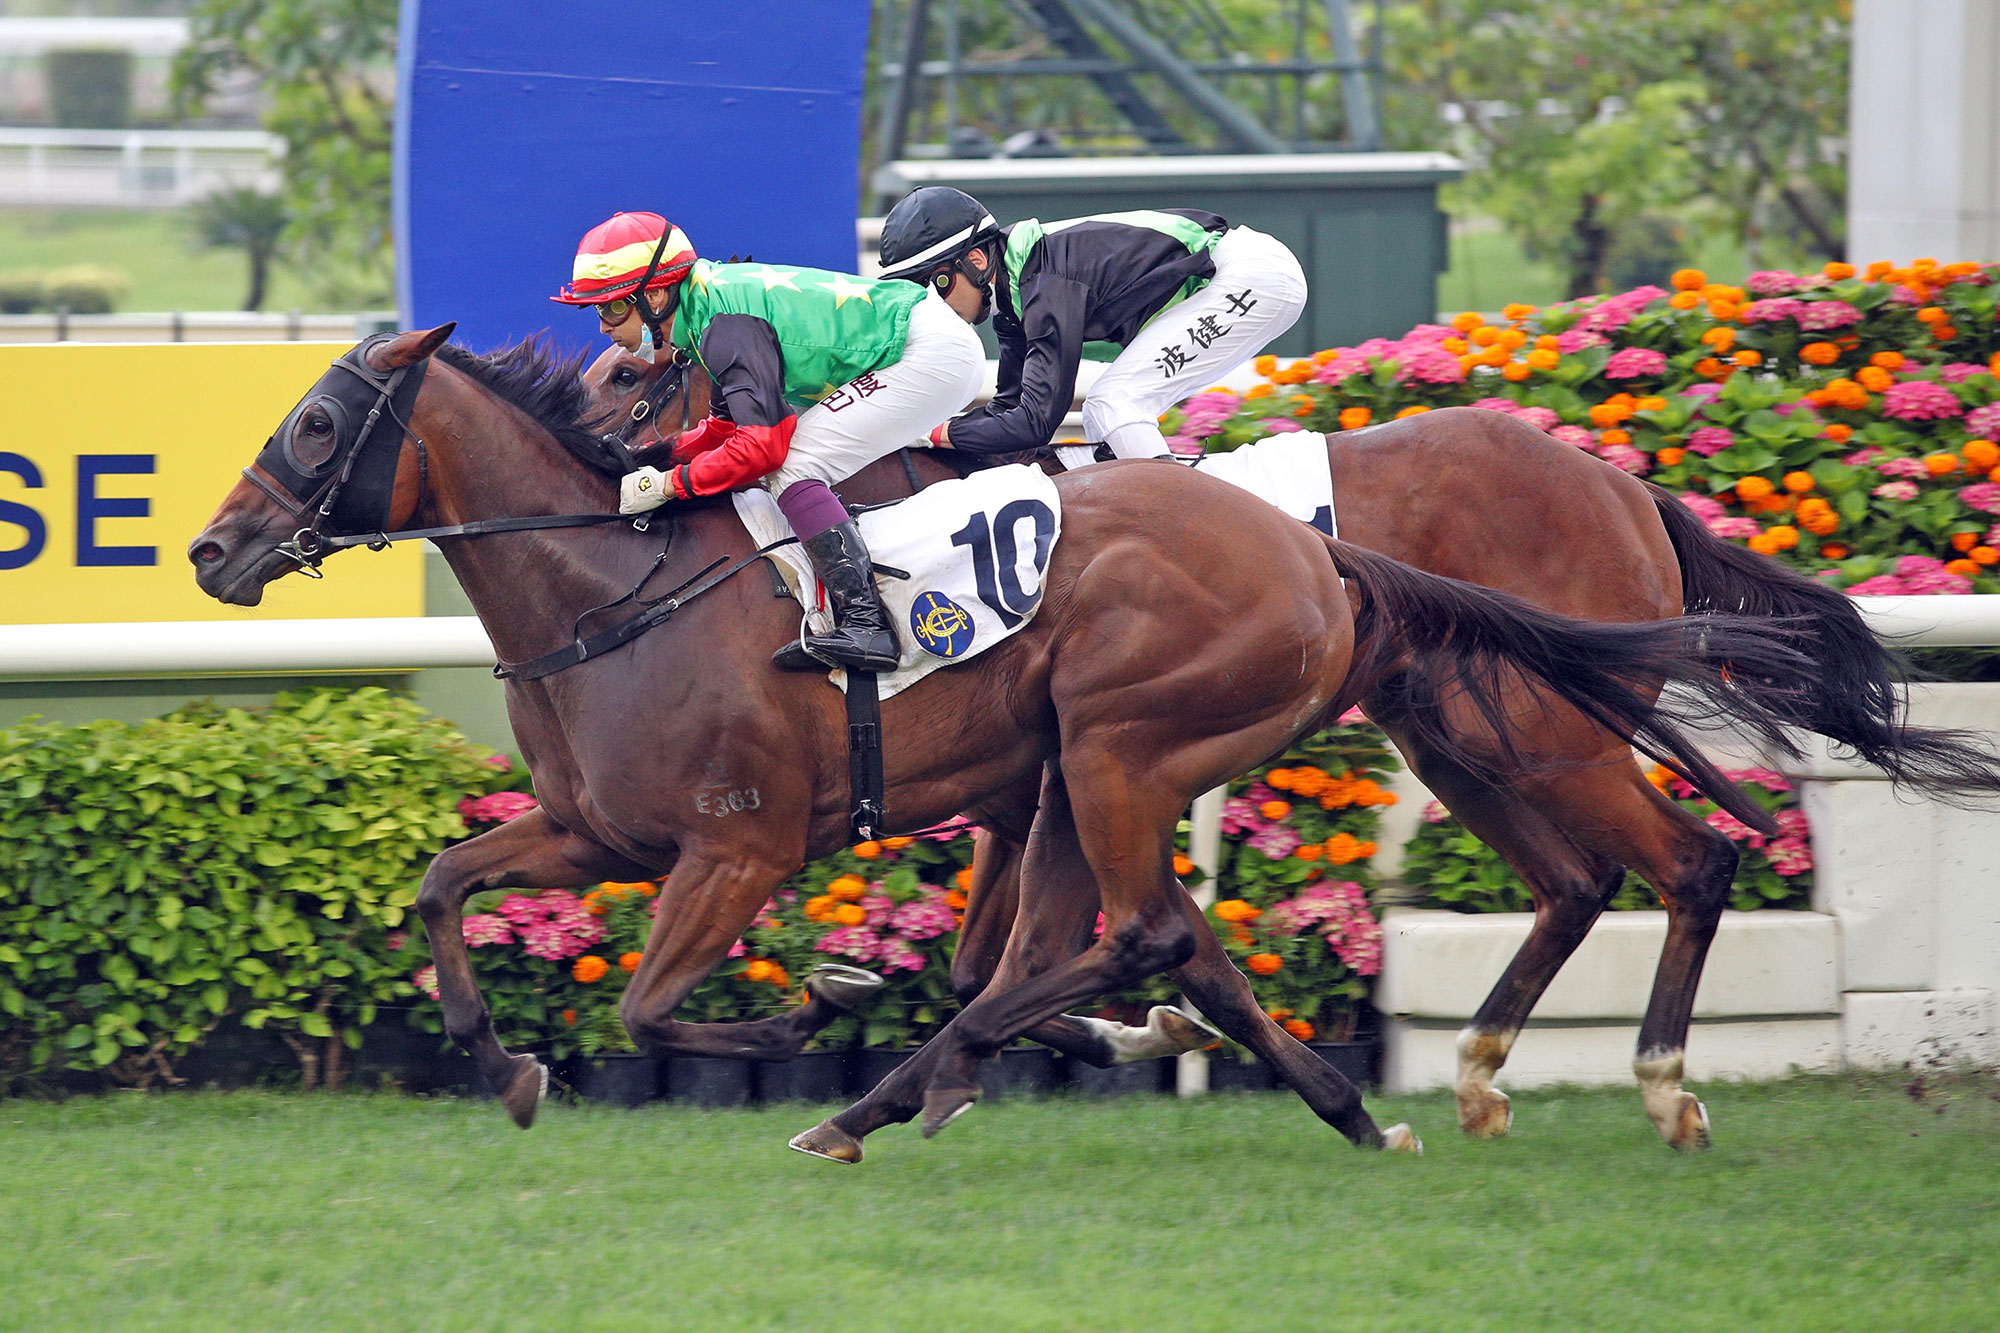 The Richard Gibson-trained Cordyceps Six takes the G3 Sha Tin Vase Handicap (1200m) under Alexis Badel at Sha Tin Racecourse today.